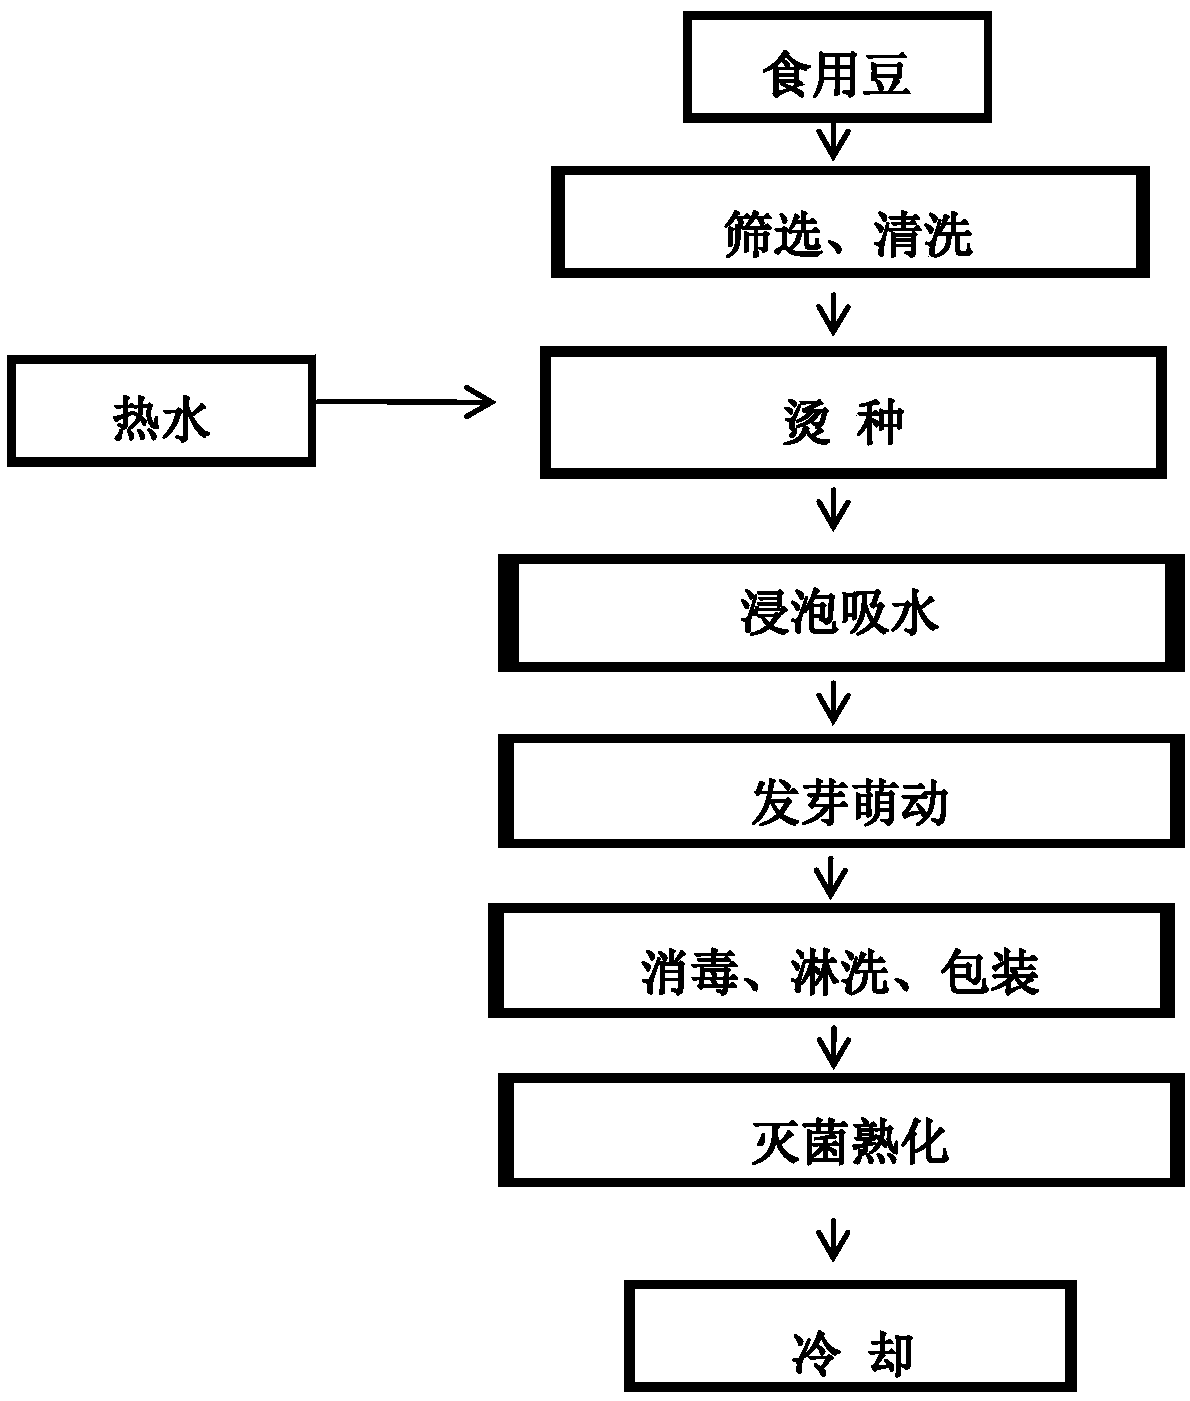 Processing method of active premade cooked beans